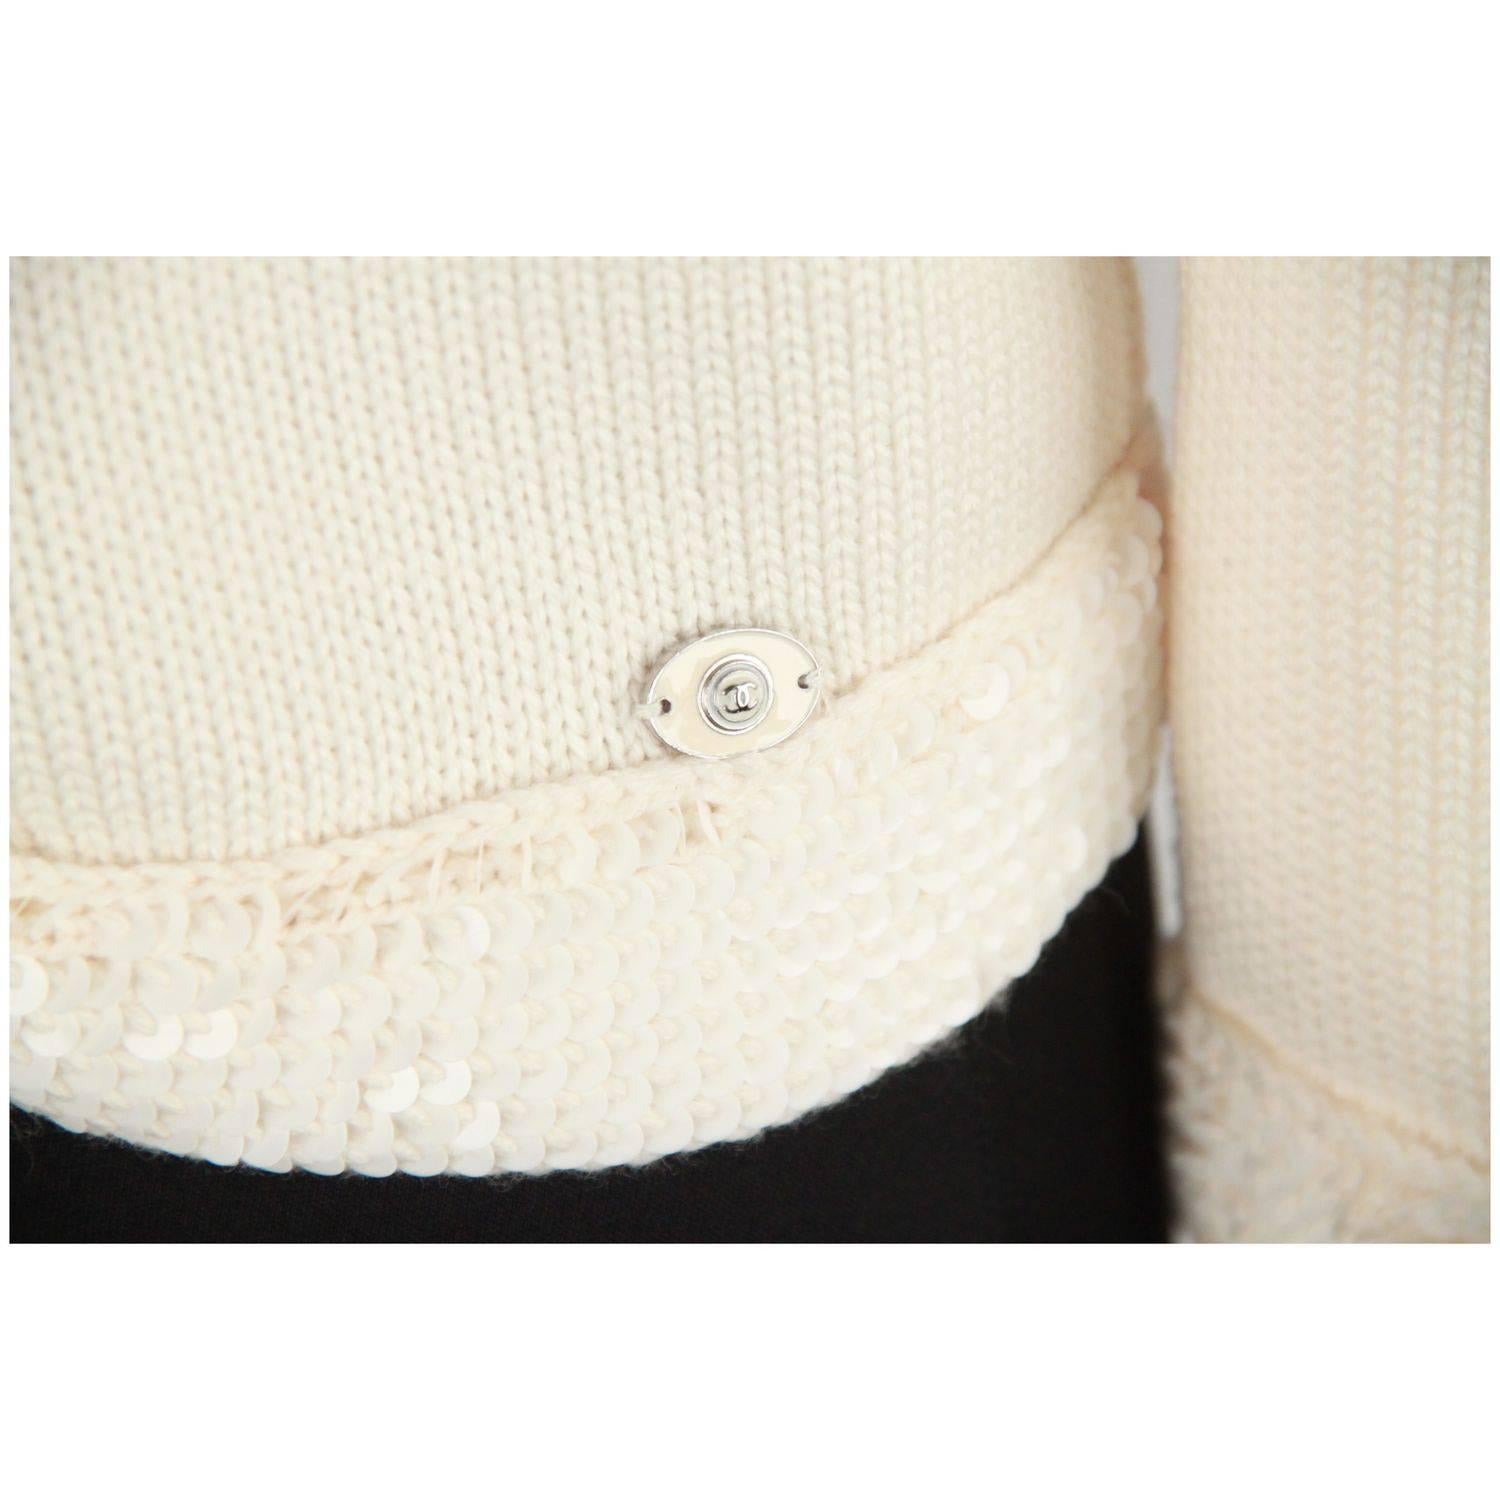 - Ivory Chanel open front cardigan
- Hook & Eye closure on the neckline
- 3/4 sleeve
- Sequinned trim
- Cropped lenght
- Size: 38 FR (The size shown for this item is the size indicated by the designer on the label). it should correspond to a